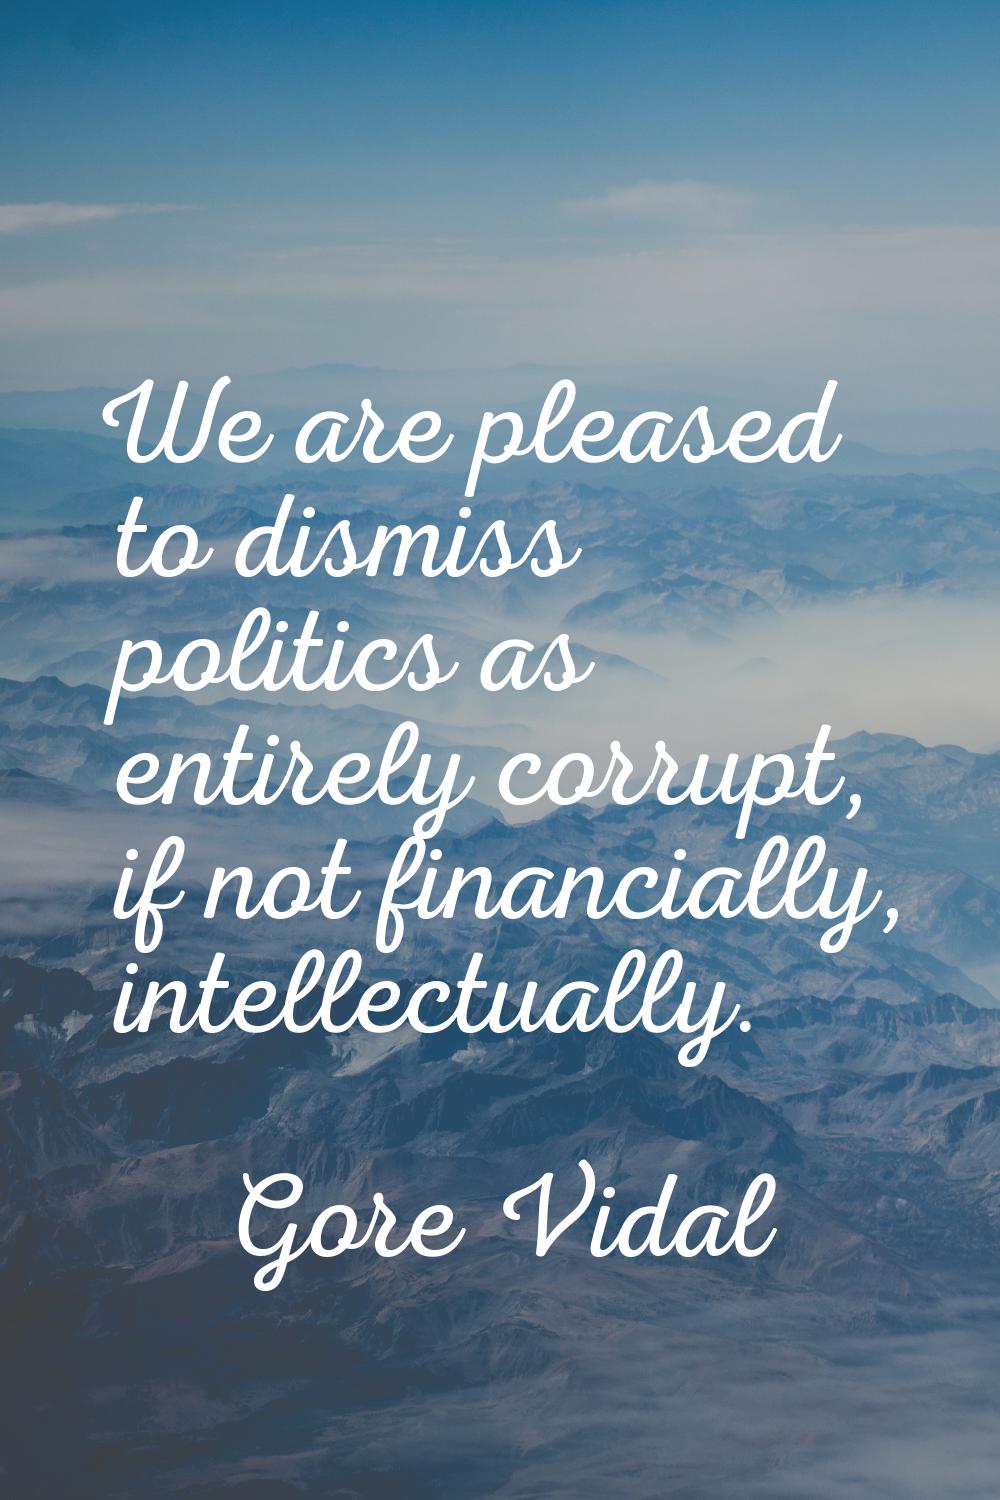 We are pleased to dismiss politics as entirely corrupt, if not financially, intellectually.